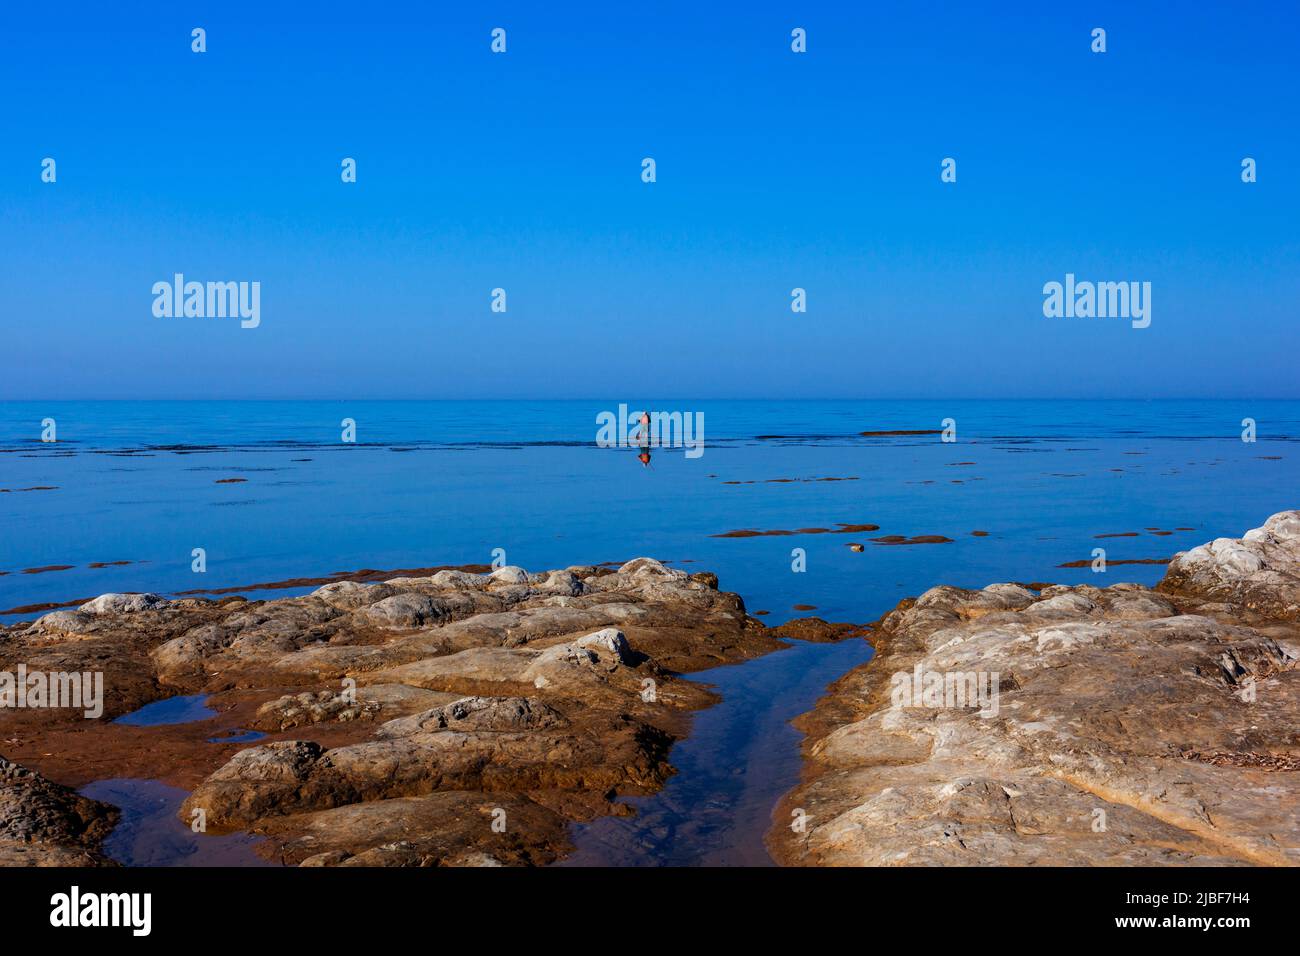 Scenic view of Sicily sea where an elderly man fishing with sticks Stock Photo